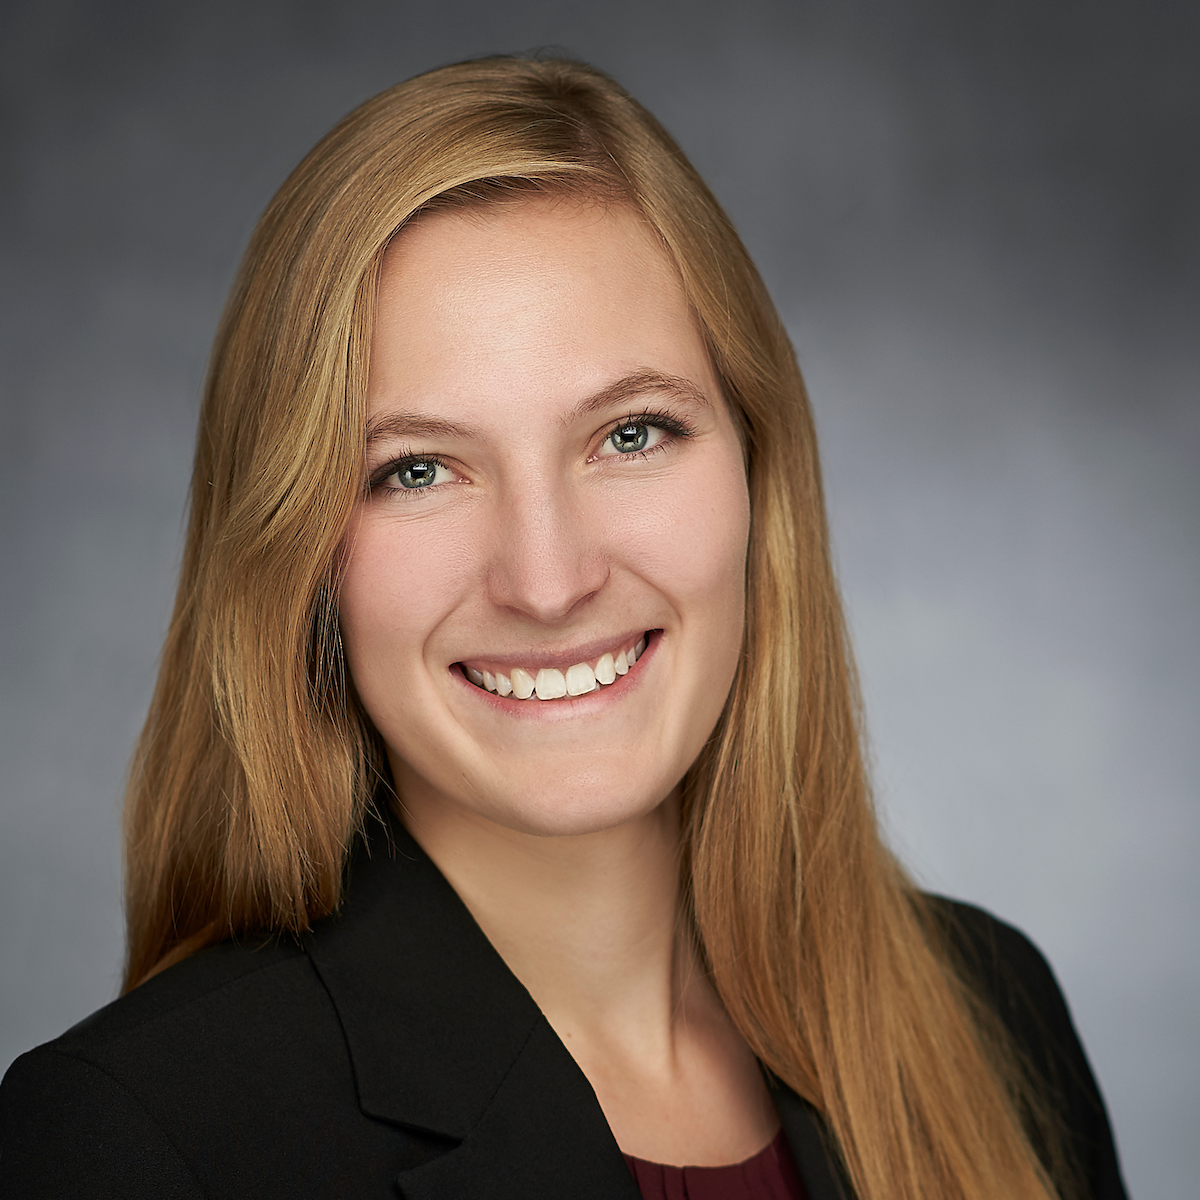 Courtney Olsen, medical scholar. She is wearing a black blazer and is smiling at the camera in front of a light gray photography studio background.